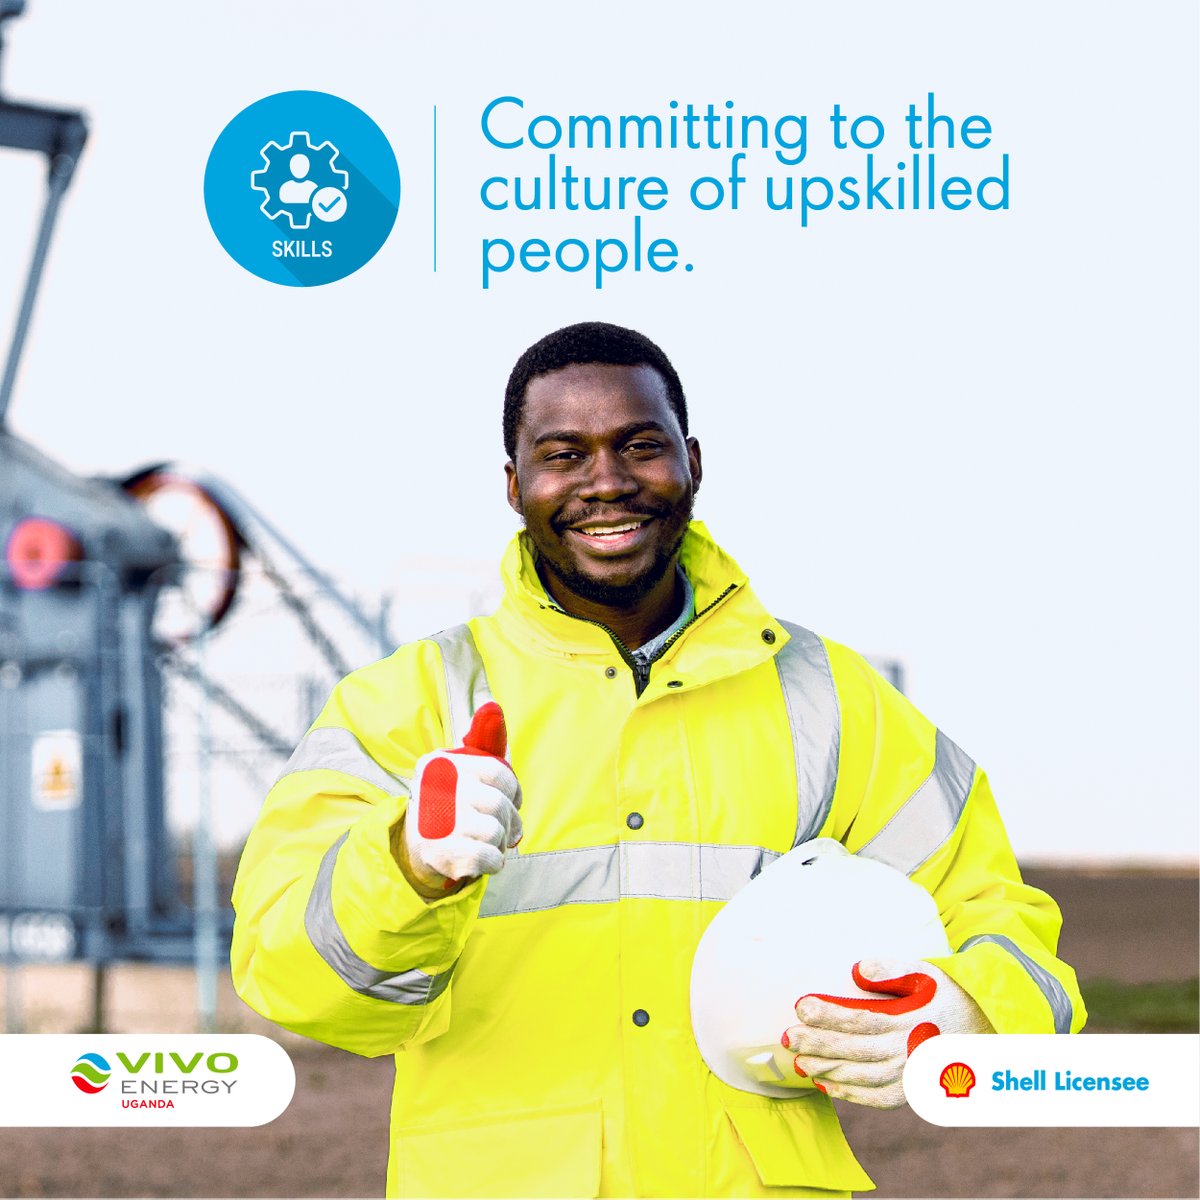 Vivo Energy believes in the continuous growth of its employees. That is why we are proud of our up-skilling initiatives, which aim to improve our employees' performance both within and outside of our ecosystem. #VivoEnergyUganda #People